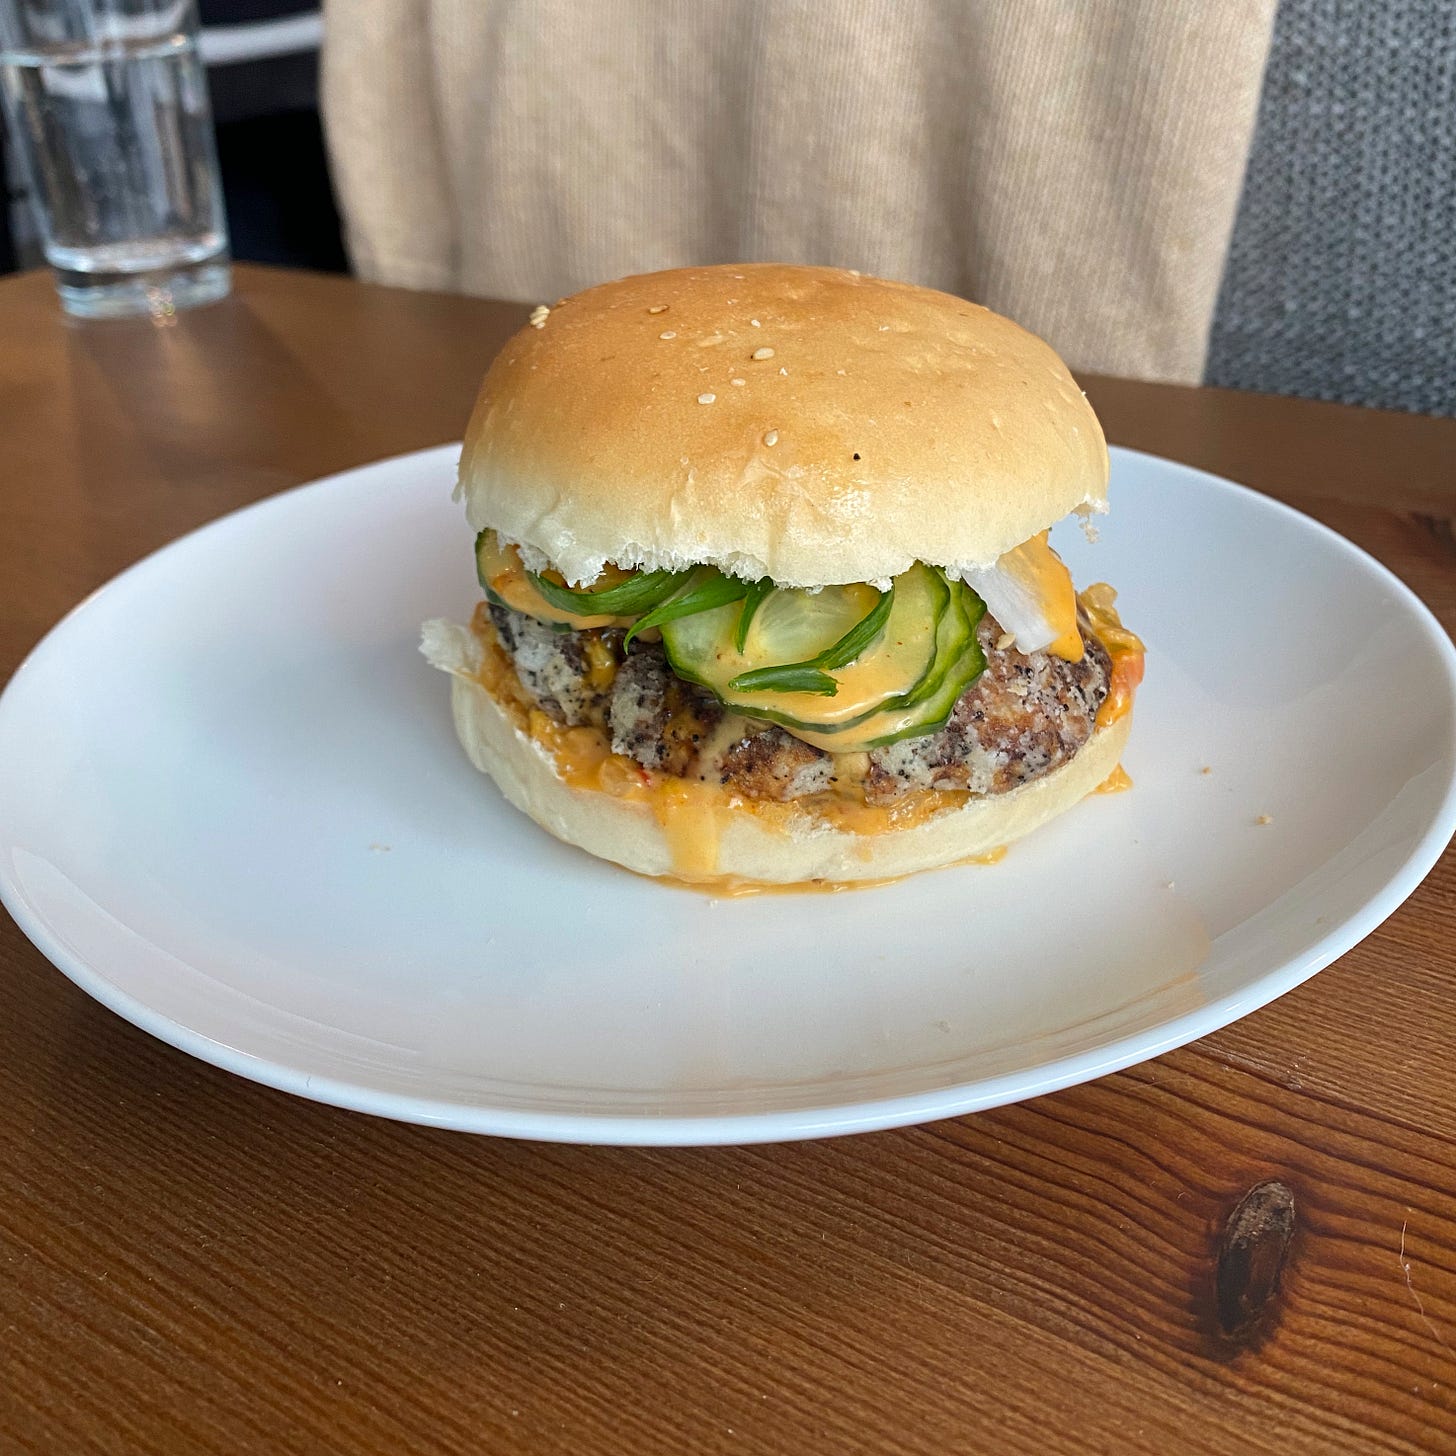 A white plate on a wooden table. On the plate is a seitan burger on a white bun, oozing with an orange sauce, and pickled cucumber and daikon are visible spilling over the edge.